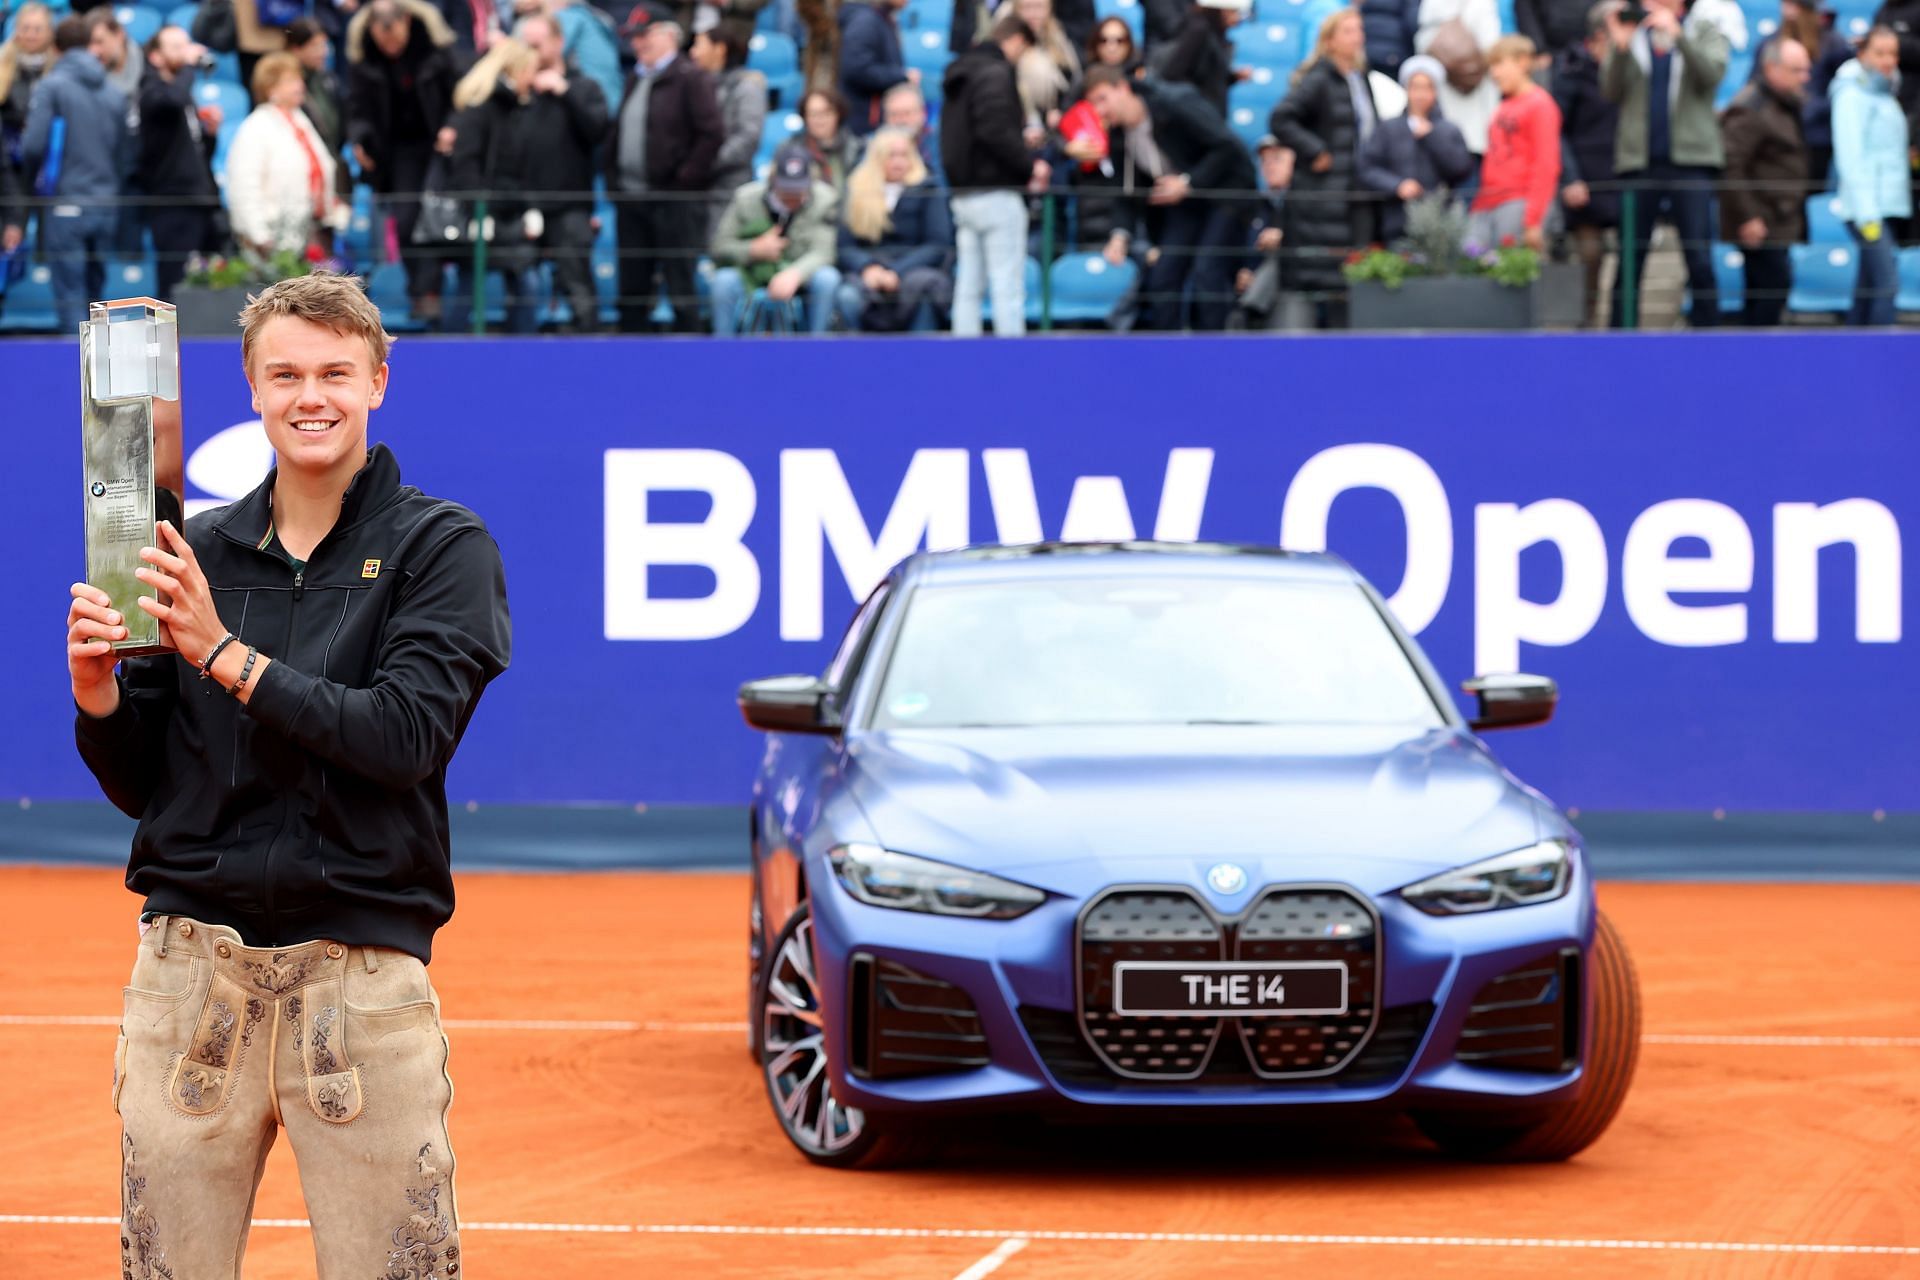 Holger Rune at the 2022 BMW Open in Munich